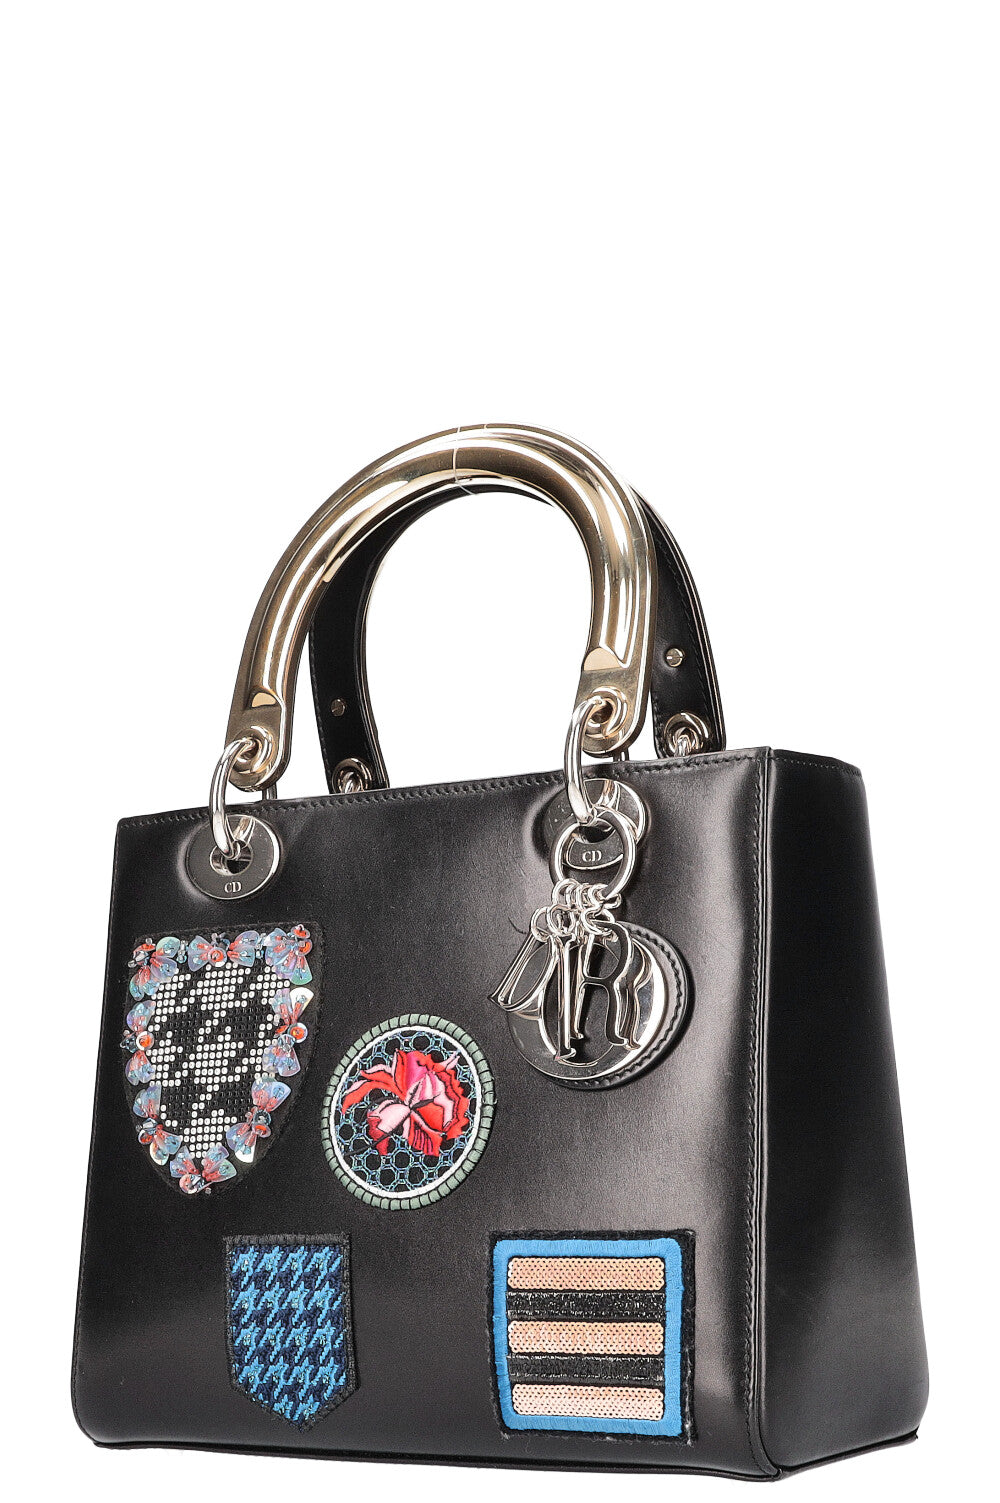 CHRISTIAN DIOR Lady Dior Bag with Embroidery Black